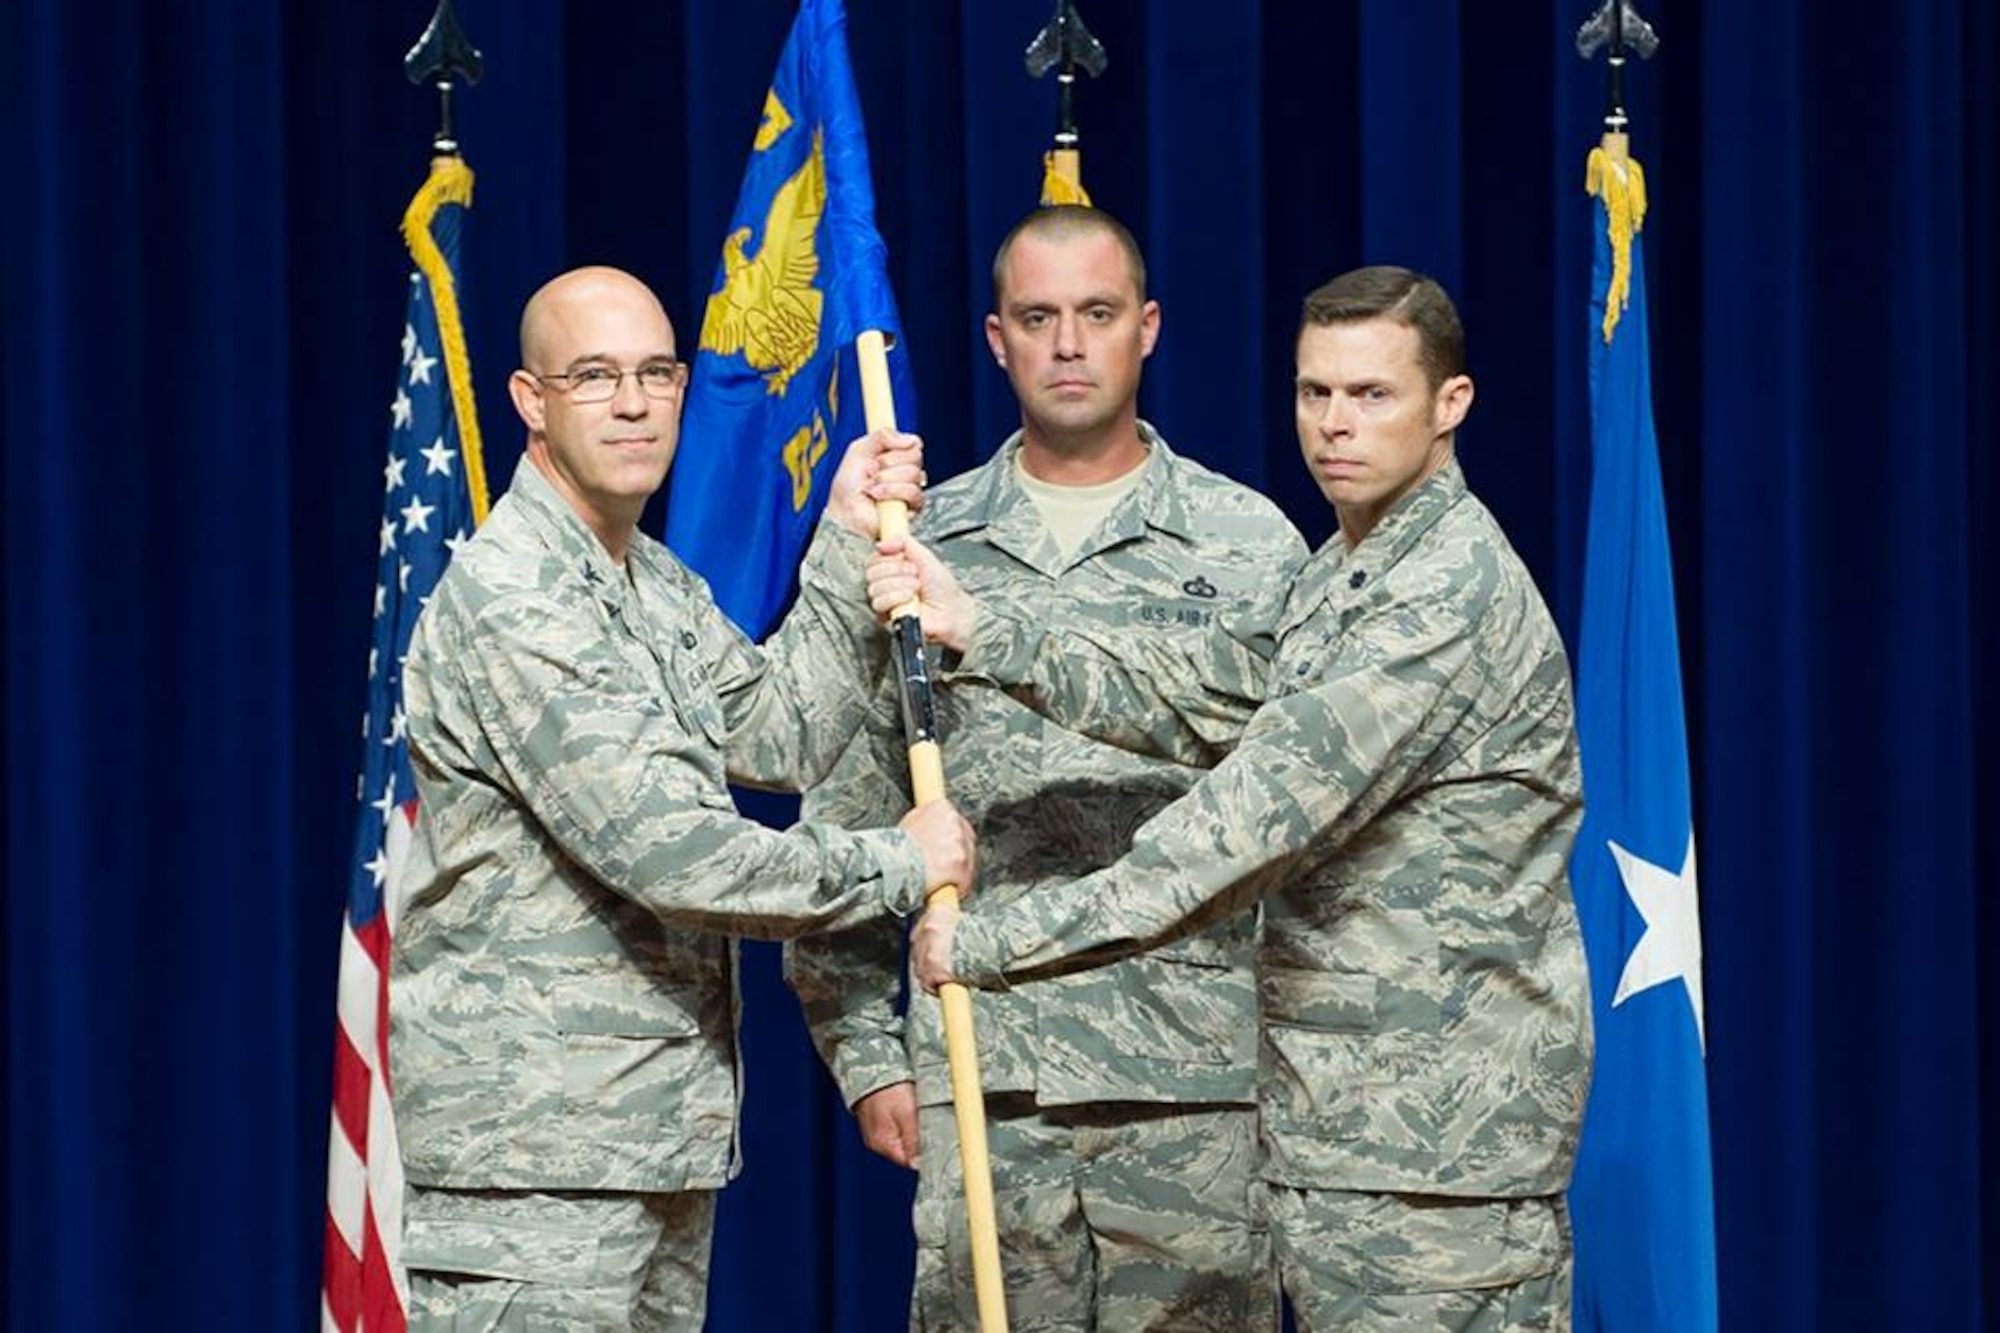 Col. Steven Lang, commander of the 45th Operations Group, presents Lt. Col. Gregory Vice, commander of the 45th Range Squadron, the 45th RANS guidon, July 31, 2018, at Patrick Air Force Base, Fla. The 45th Operations Support Squadron and 1st Range Operations Squadron inactivated and merged its mission and personnel together, now a single squadron, the 45th RANS. (U.S. Air Force photo by Phillip Sunkel)